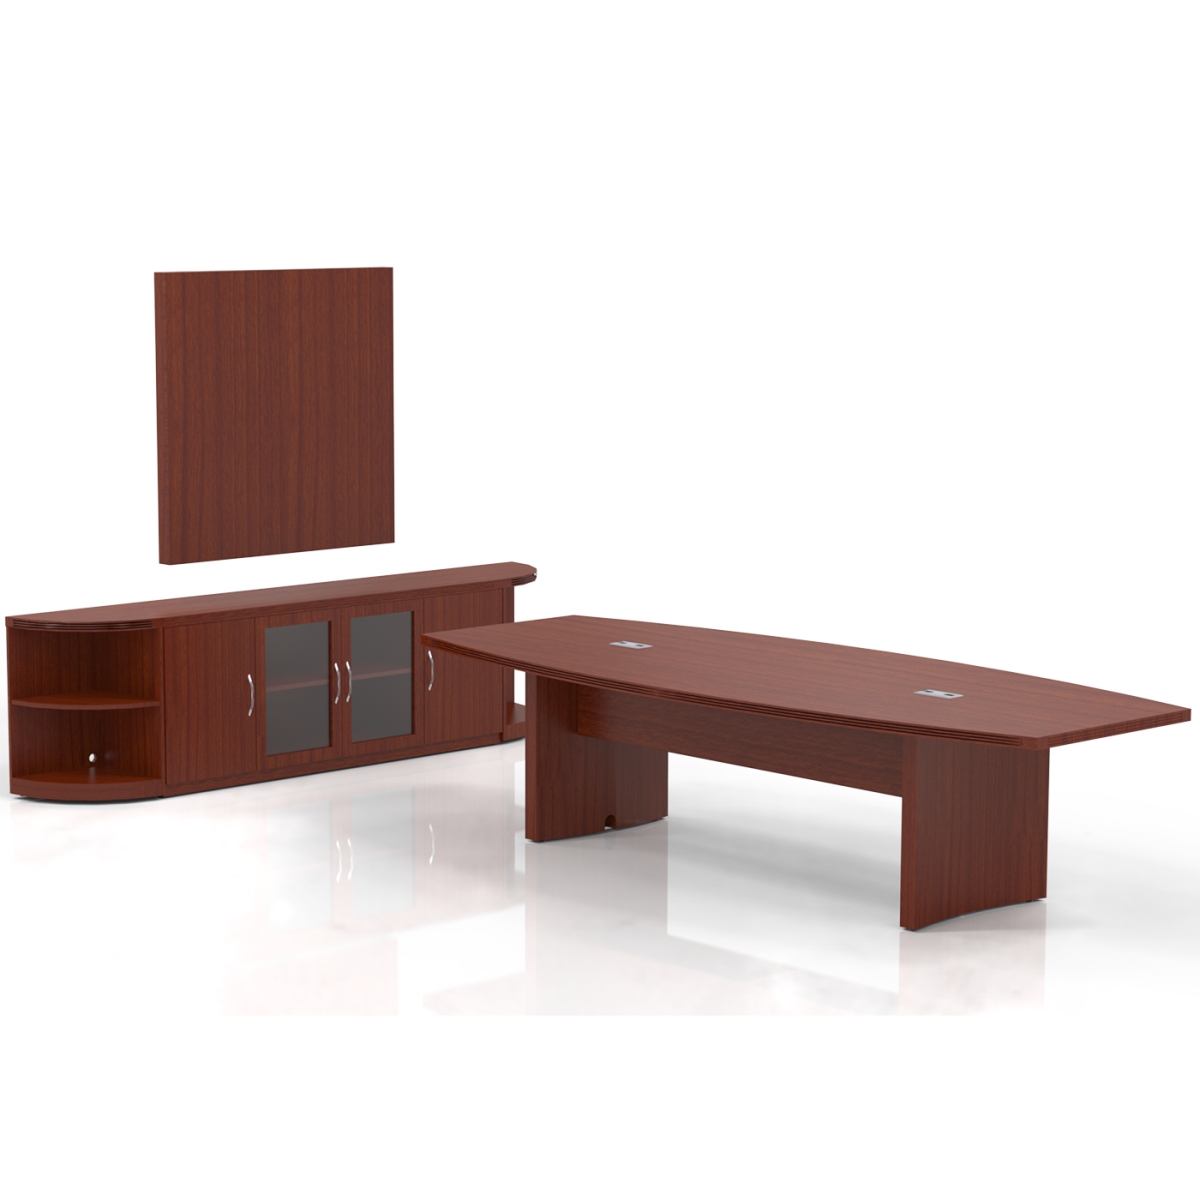 At39lcr 9 In. X 15 Ft. Aberdeen Series Suite 39 Conference Room Desk, Cherry